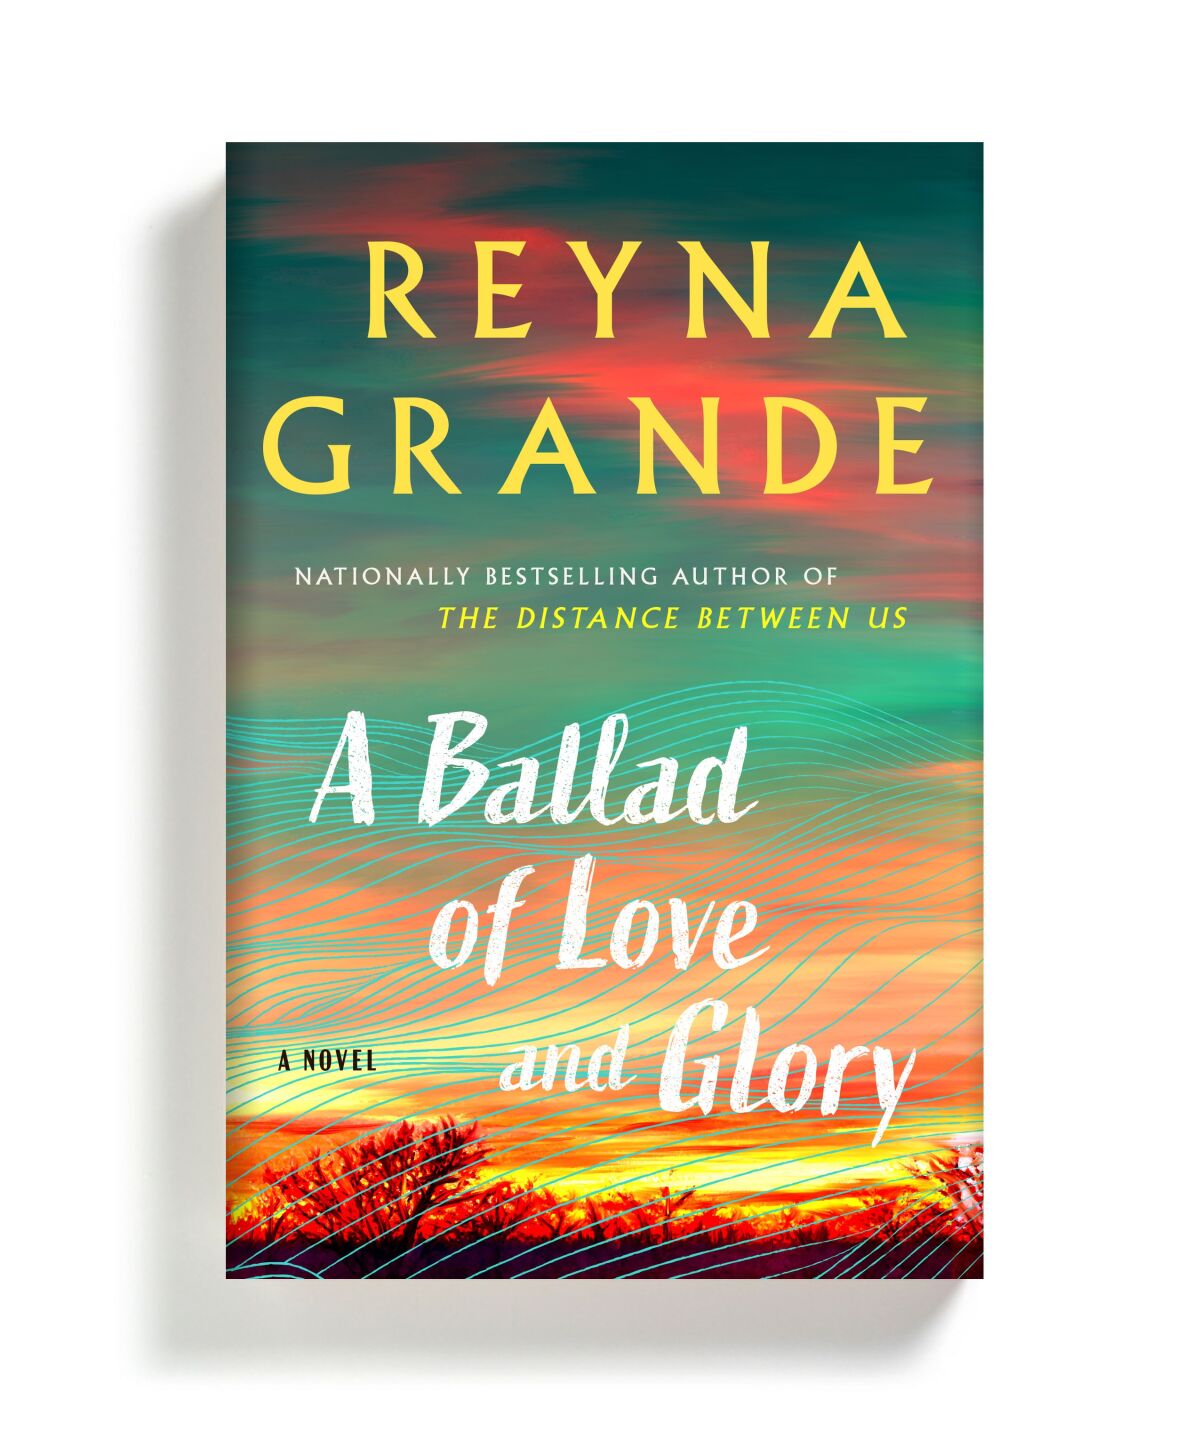 Book cover for "A Ballad of Love and Glory" by Reyna Grande.